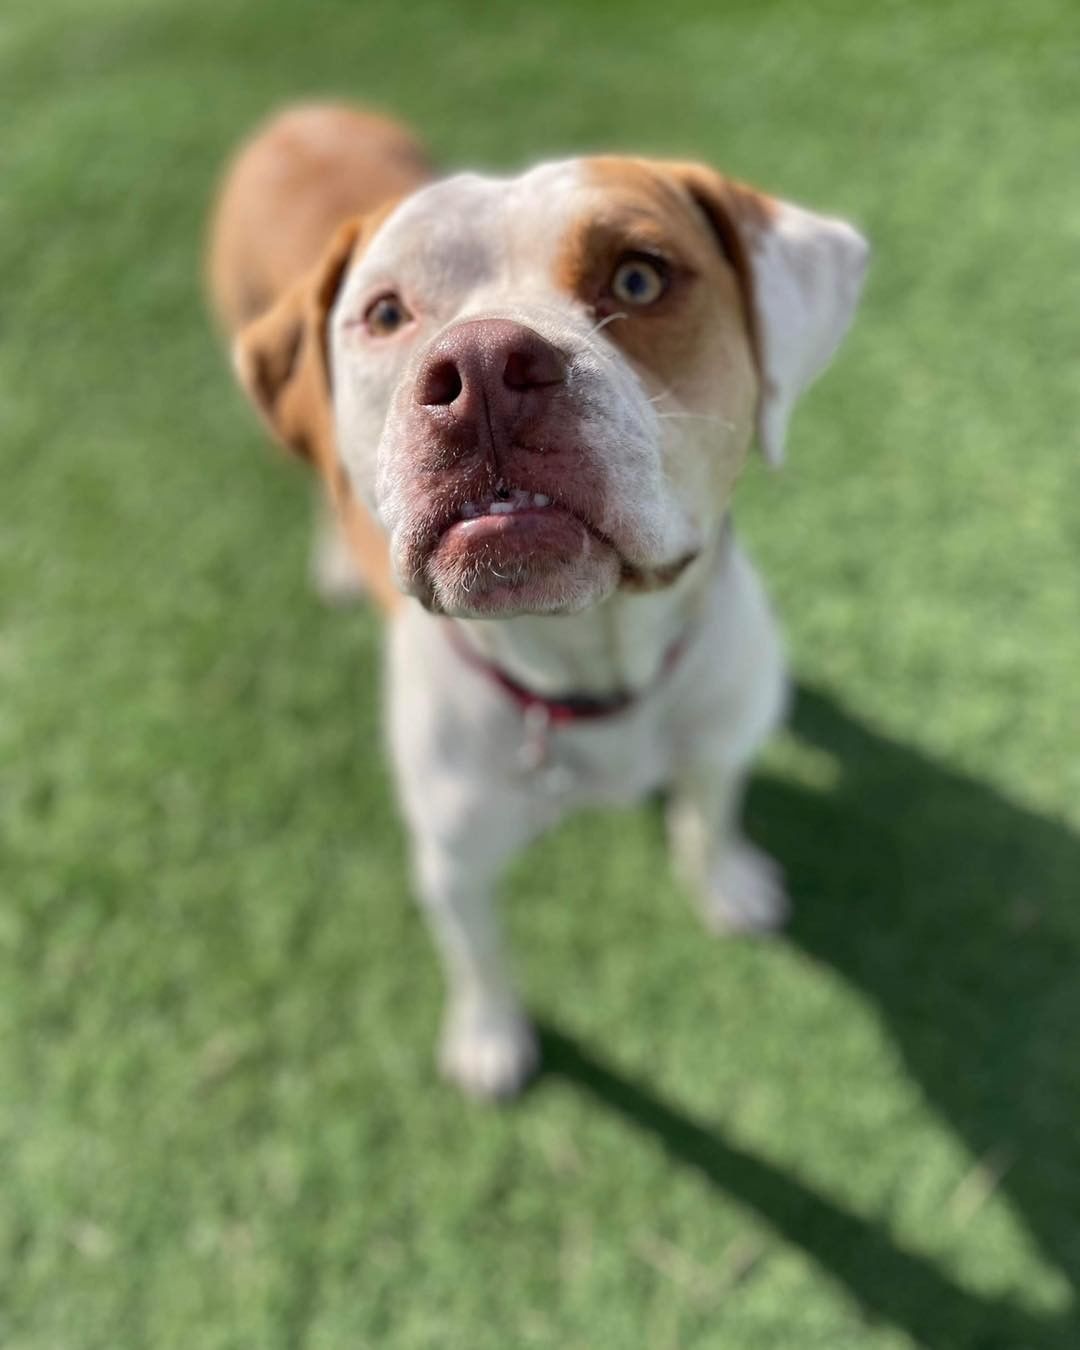 Rylan wanted to show off all his angles, and it seems he doesn’t have a bad one! 

This handsome boy has been searching for a special home to call his own for 7 months 😢💔

Rylan is a 2 year old pit mix who needs a home with a patient adopter that will help him become more confident and allow him to come out of his shell at his own pace. Rylan gains confidence by being around other dogs who dog better than he does. 

His ideal home doesn’t have a lot of people coming and going. He would do well in a home with older kids. He just needs a special someone to give him all the love forever has to offer!

Apply to adopt Rylan at lucky13rescue.org or by using the link: https://www.shelterluv.com/matchme/adopt/LUCK/Dog